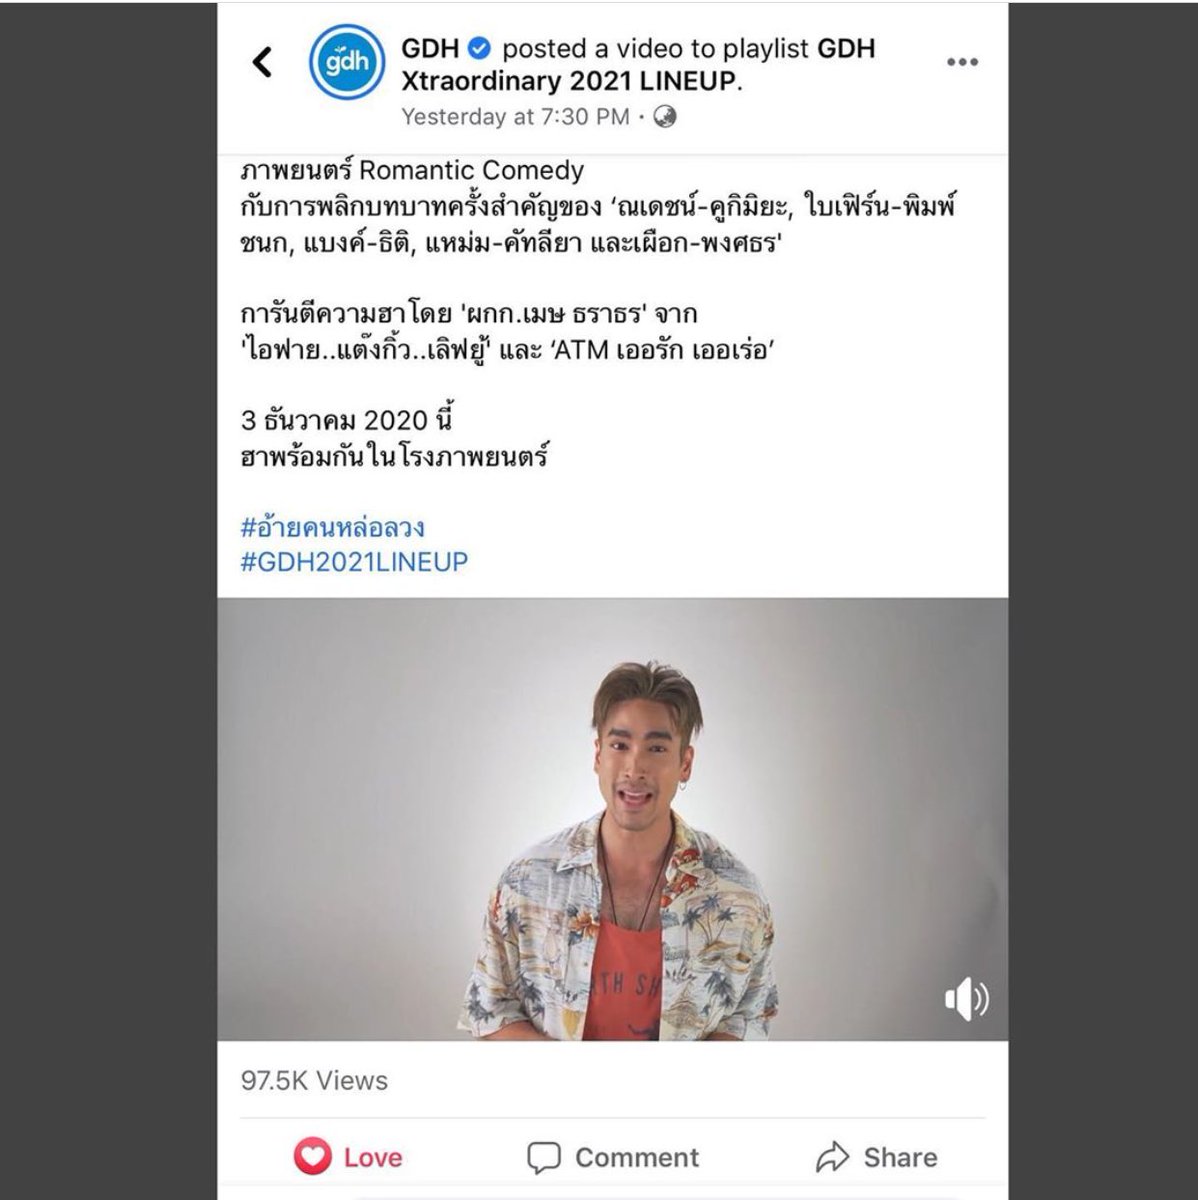 Hi guys! Please watch the movie teaser of Nadech Kugimiya at Official Facebook Page of GDH.LINK IS HERE:  https://www.facebook.com/gdh559/videos/687937185147136/?vh=e&extid=6LiQyrkDoqh1SI1Y&d=nLet’s gain more views for this. Thank you so much!  #GDHmovie  #nadech  #kugimiyas  #ณเดชน์  #อ้ายคนหล่อลวง